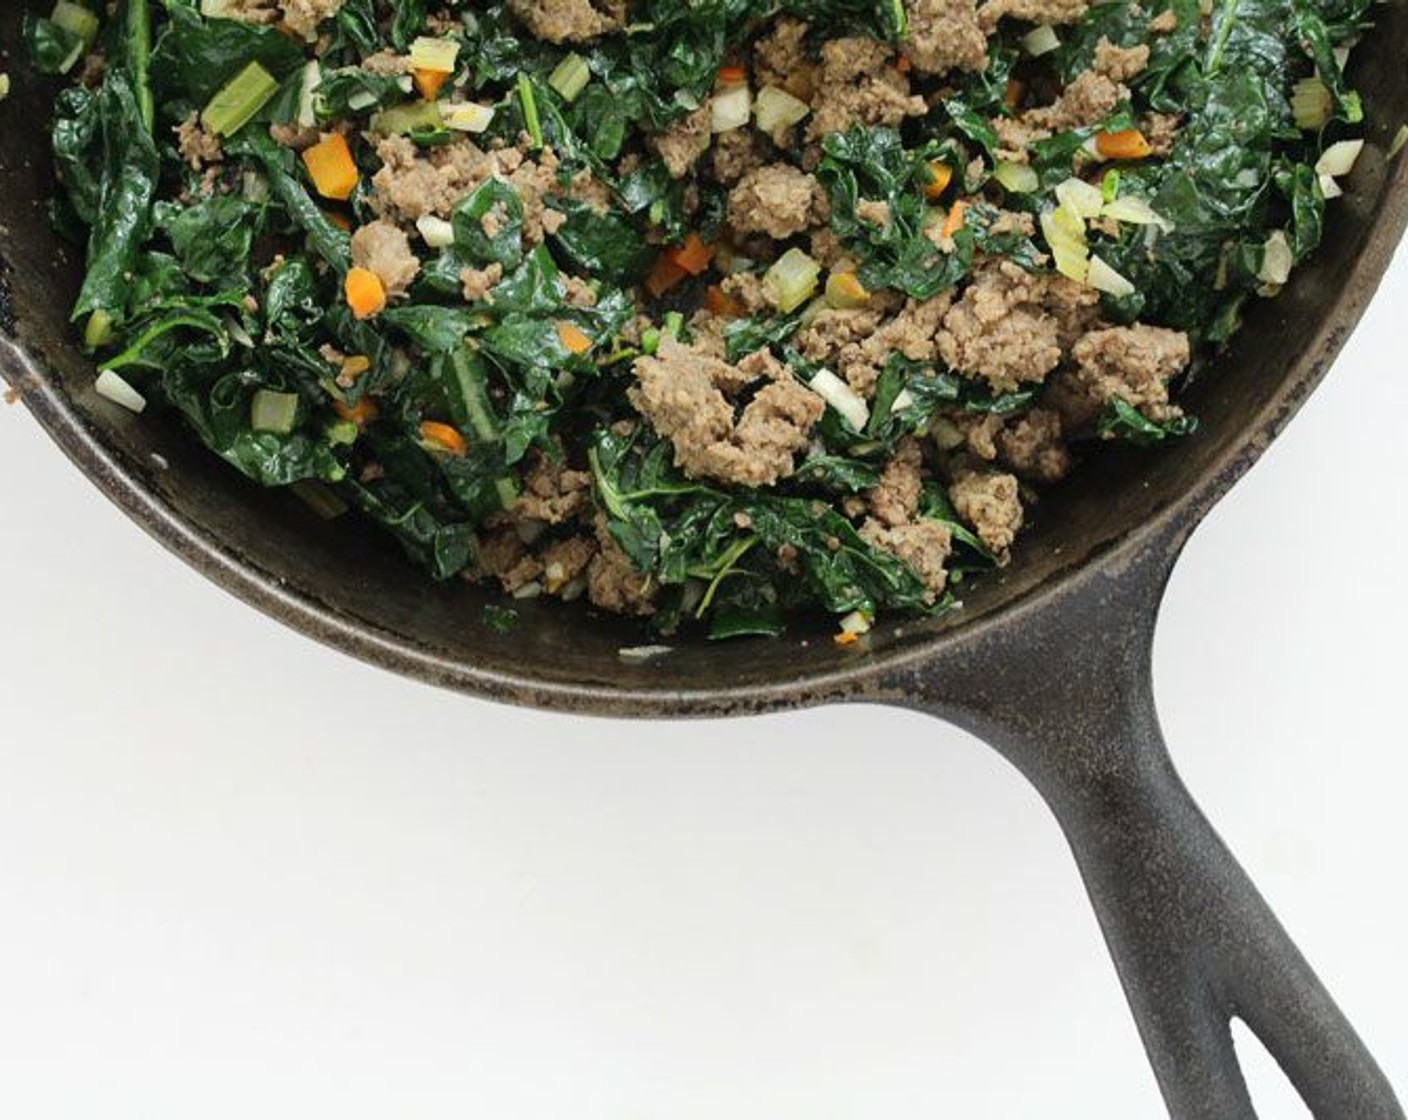 step 2 Cook the Ground Beef (1 lb) in a large skillet over medium high heat until partially done, then add the minced Garlic (4 cloves), diced Carrot (3/4 cup), Radish (3/4 cup), Celery (3/4 cup) and chopped Kale (3 cups). Cook for 5-10 minutes.